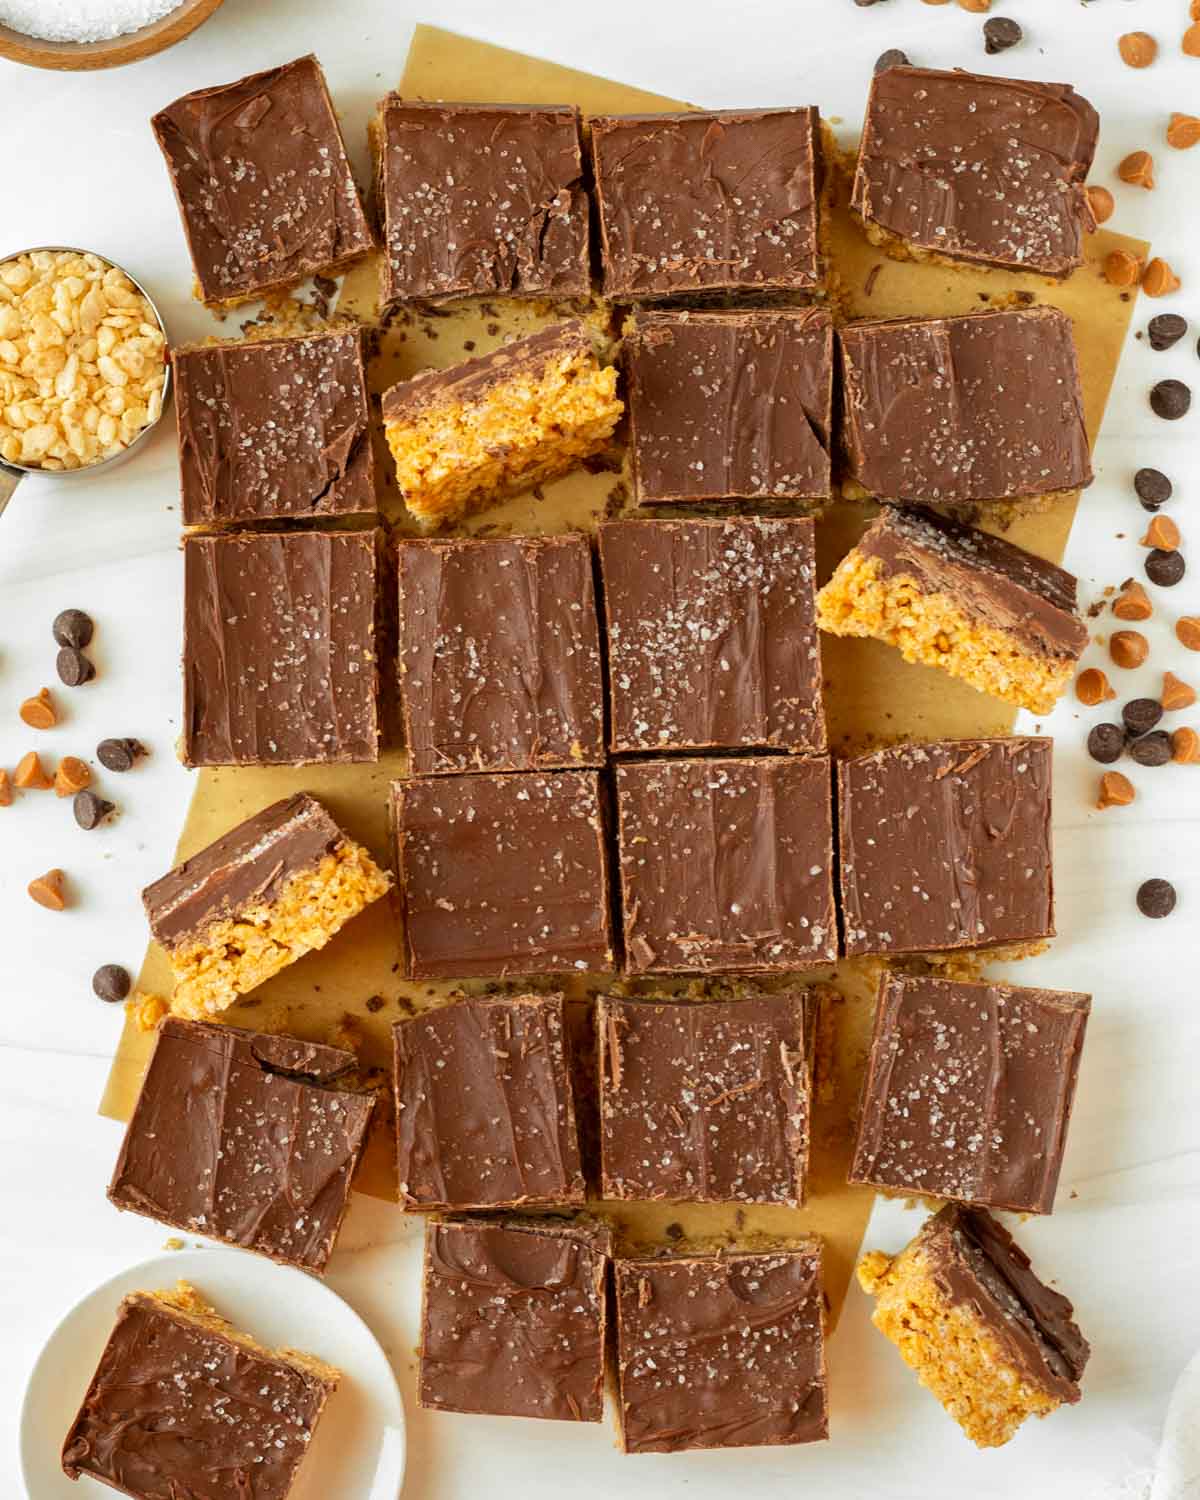 These classic scotcharoos are peanut butter crispy cereal bars made without corn syrup and topped with a thick layer of melted chocolate and butterscotch chips. This easy no-bake dessert is perfect for serving at a party or potluck and a great addition to a holiday meal.